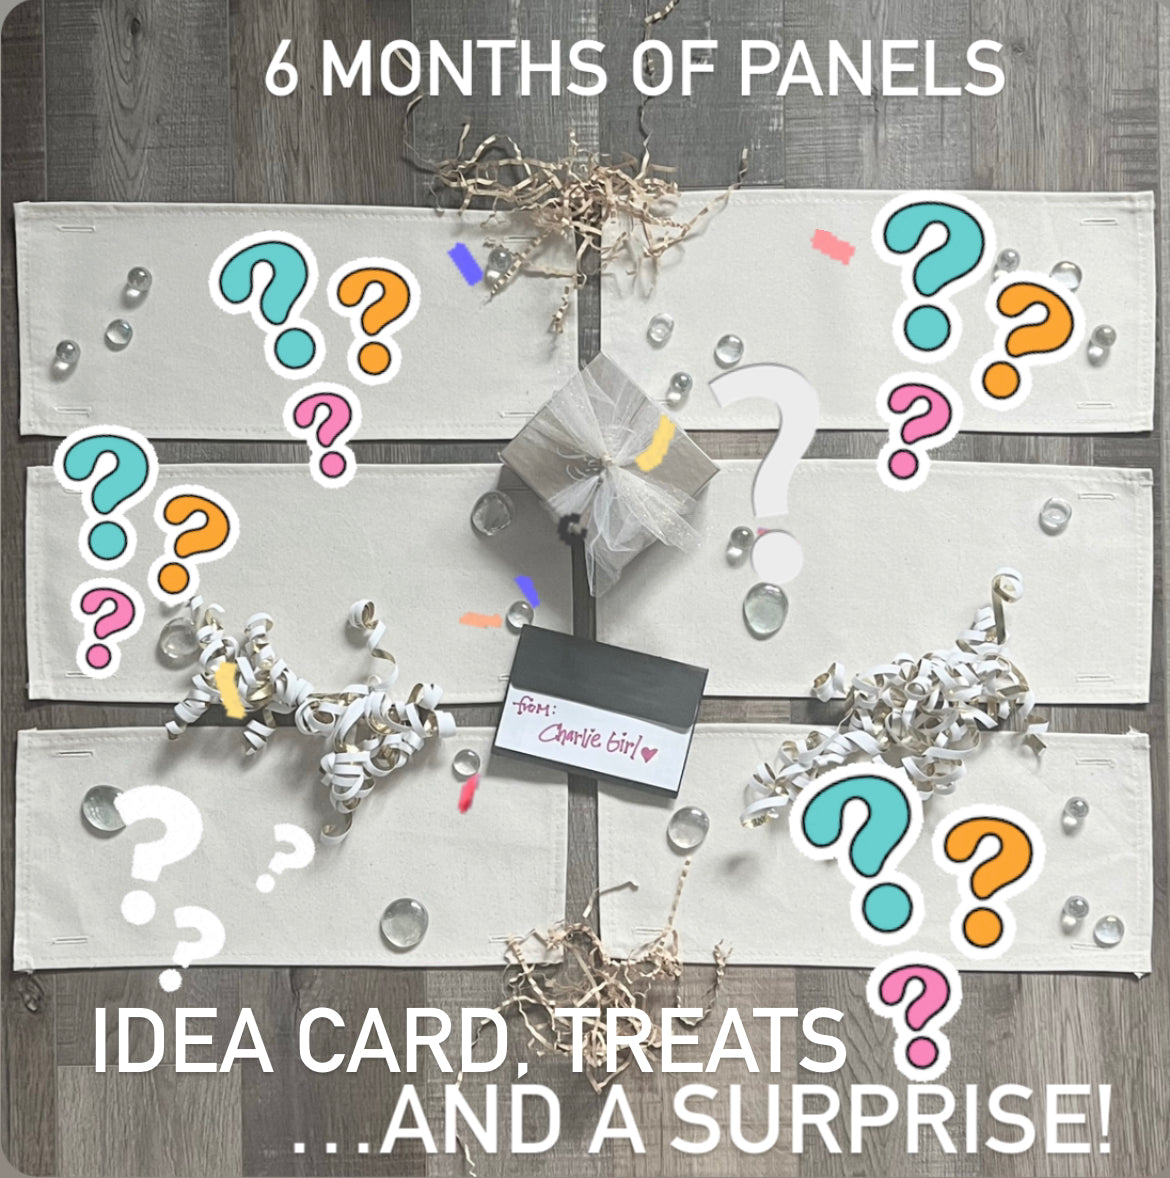 "Panel of the Month" 6-Month Subscription:  {PERFECT FOR MOTHER'S DAY GIFT!}  We send it for you! Treats, gifts and panels every month!